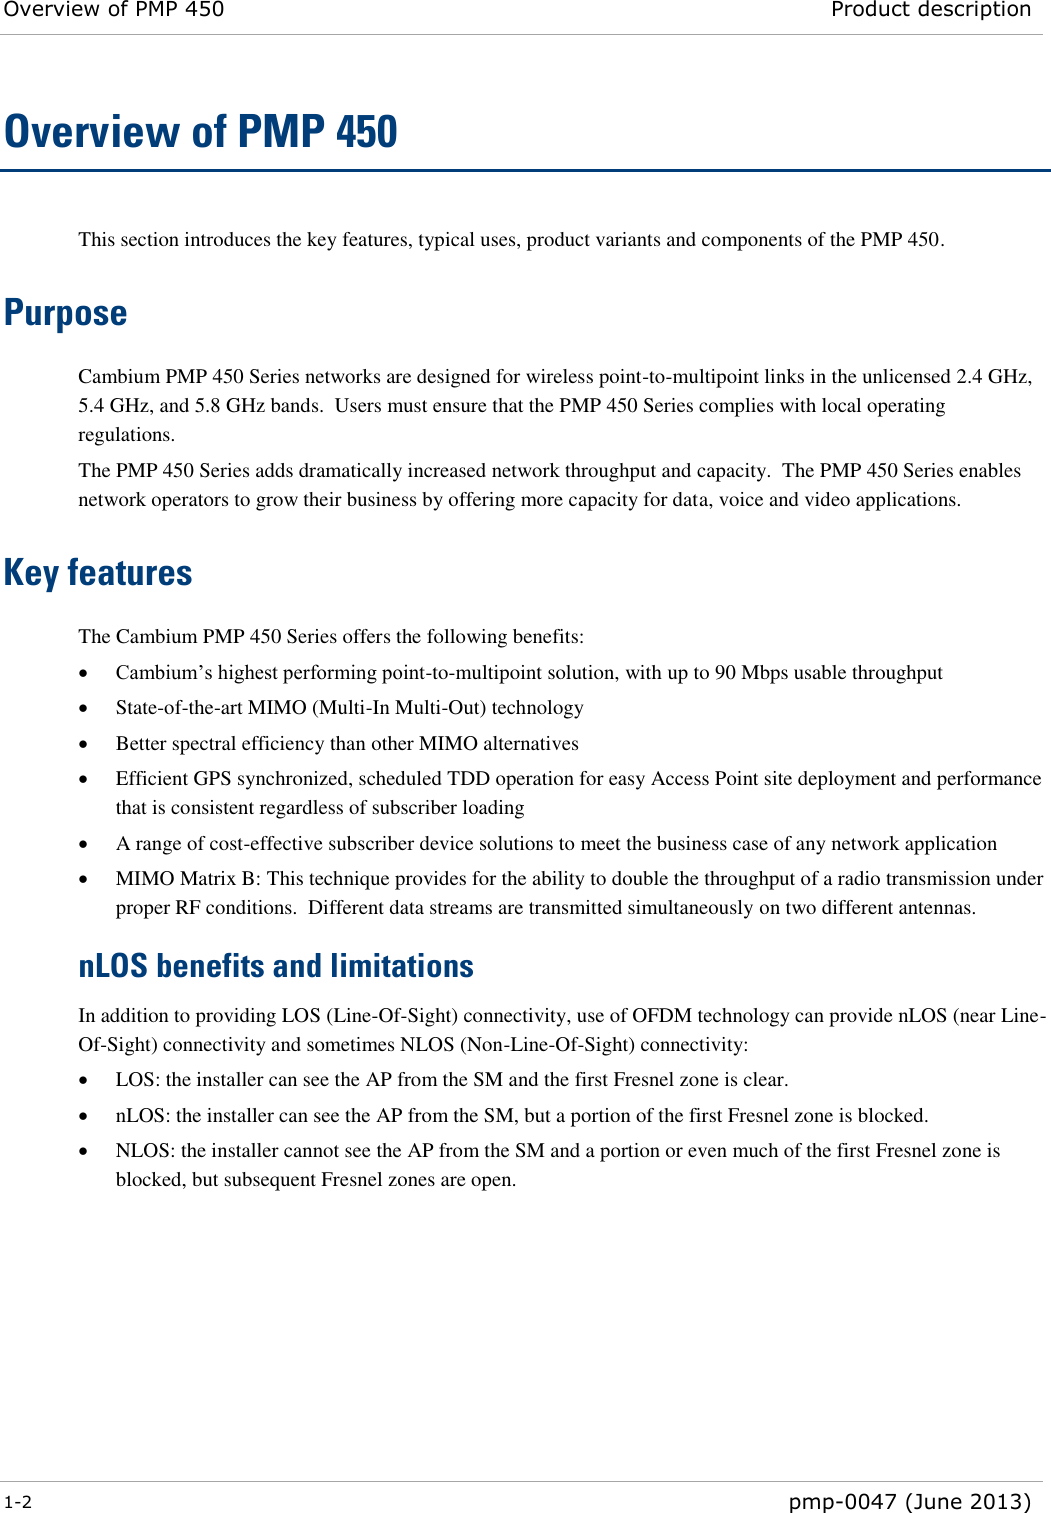 Overview of PMP 450 Product description  1-2  pmp-0047 (June 2013)  Overview of PMP 450 This section introduces the key features, typical uses, product variants and components of the PMP 450. Purpose Cambium PMP 450 Series networks are designed for wireless point-to-multipoint links in the unlicensed 2.4 GHz, 5.4 GHz, and 5.8 GHz bands.  Users must ensure that the PMP 450 Series complies with local operating regulations. The PMP 450 Series adds dramatically increased network throughput and capacity.  The PMP 450 Series enables network operators to grow their business by offering more capacity for data, voice and video applications. Key features The Cambium PMP 450 Series offers the following benefits:  Cambium’s highest performing point-to-multipoint solution, with up to 90 Mbps usable throughput  State-of-the-art MIMO (Multi-In Multi-Out) technology   Better spectral efficiency than other MIMO alternatives  Efficient GPS synchronized, scheduled TDD operation for easy Access Point site deployment and performance that is consistent regardless of subscriber loading  A range of cost-effective subscriber device solutions to meet the business case of any network application  MIMO Matrix B: This technique provides for the ability to double the throughput of a radio transmission under proper RF conditions.  Different data streams are transmitted simultaneously on two different antennas. nLOS benefits and limitations In addition to providing LOS (Line-Of-Sight) connectivity, use of OFDM technology can provide nLOS (near Line-Of-Sight) connectivity and sometimes NLOS (Non-Line-Of-Sight) connectivity:  LOS: the installer can see the AP from the SM and the first Fresnel zone is clear.  nLOS: the installer can see the AP from the SM, but a portion of the first Fresnel zone is blocked.  NLOS: the installer cannot see the AP from the SM and a portion or even much of the first Fresnel zone is blocked, but subsequent Fresnel zones are open. 